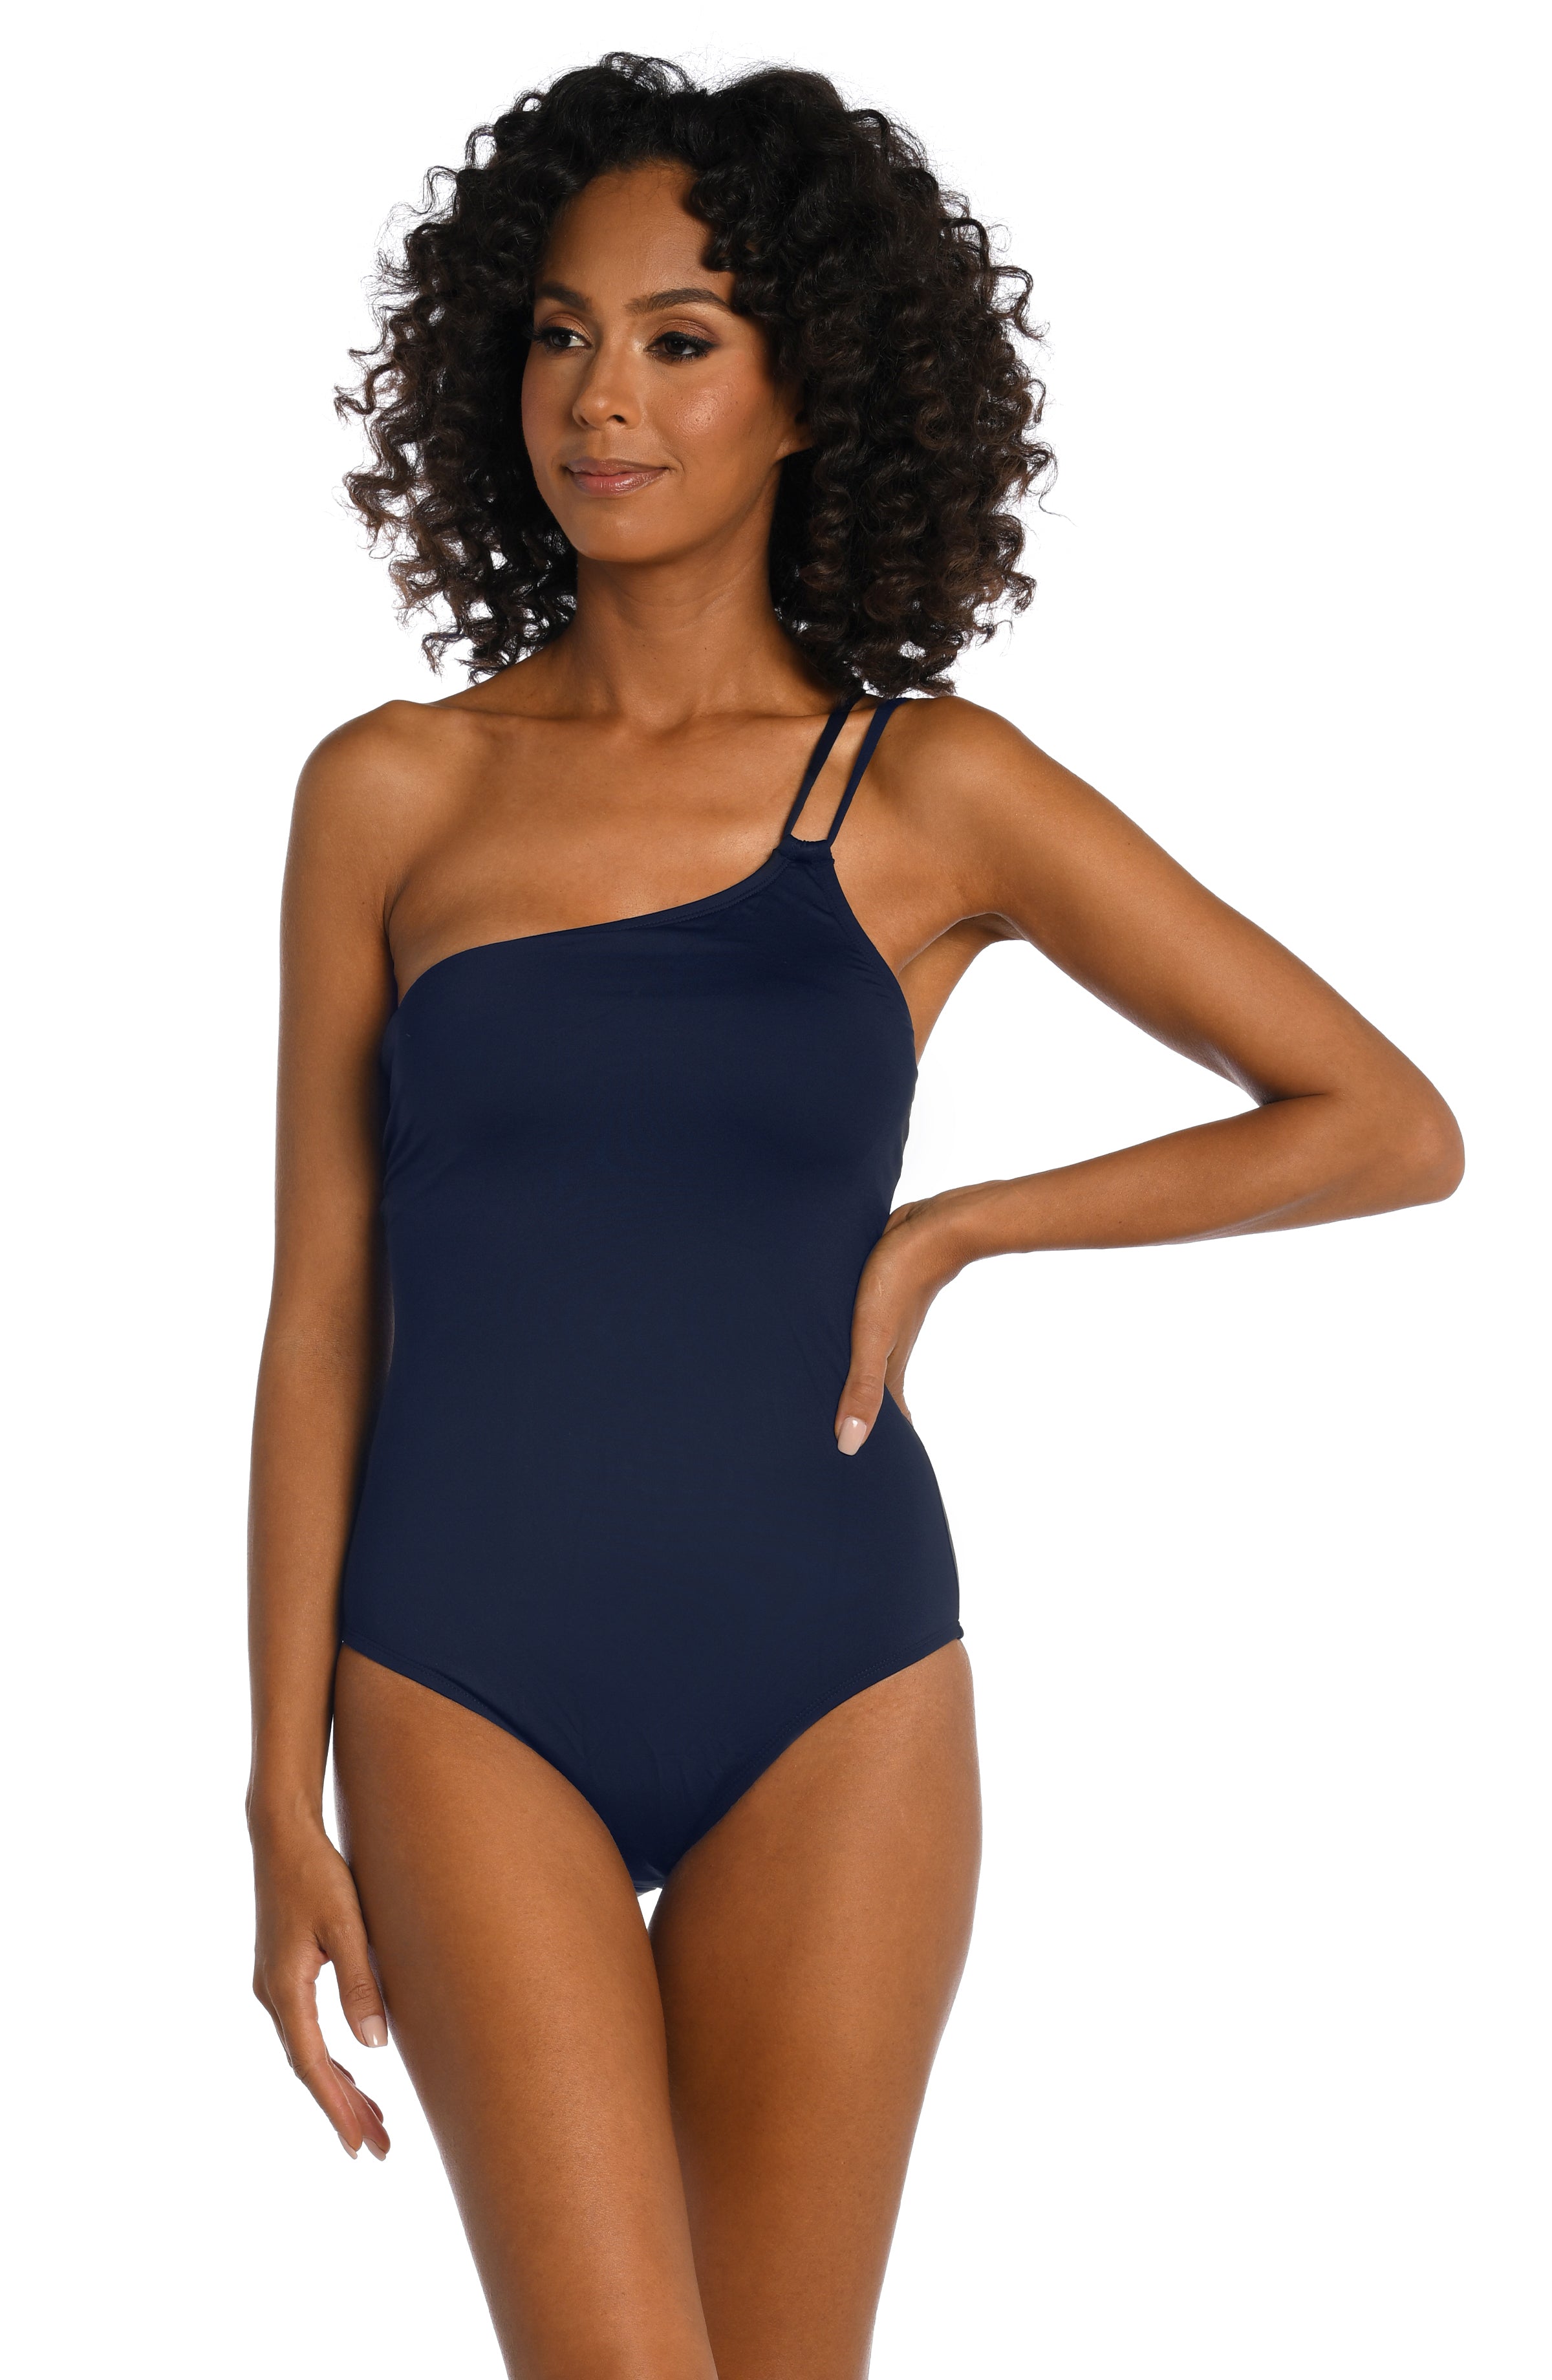 Dido Blue/White Swimsuit - One Shoulder Swimsuit